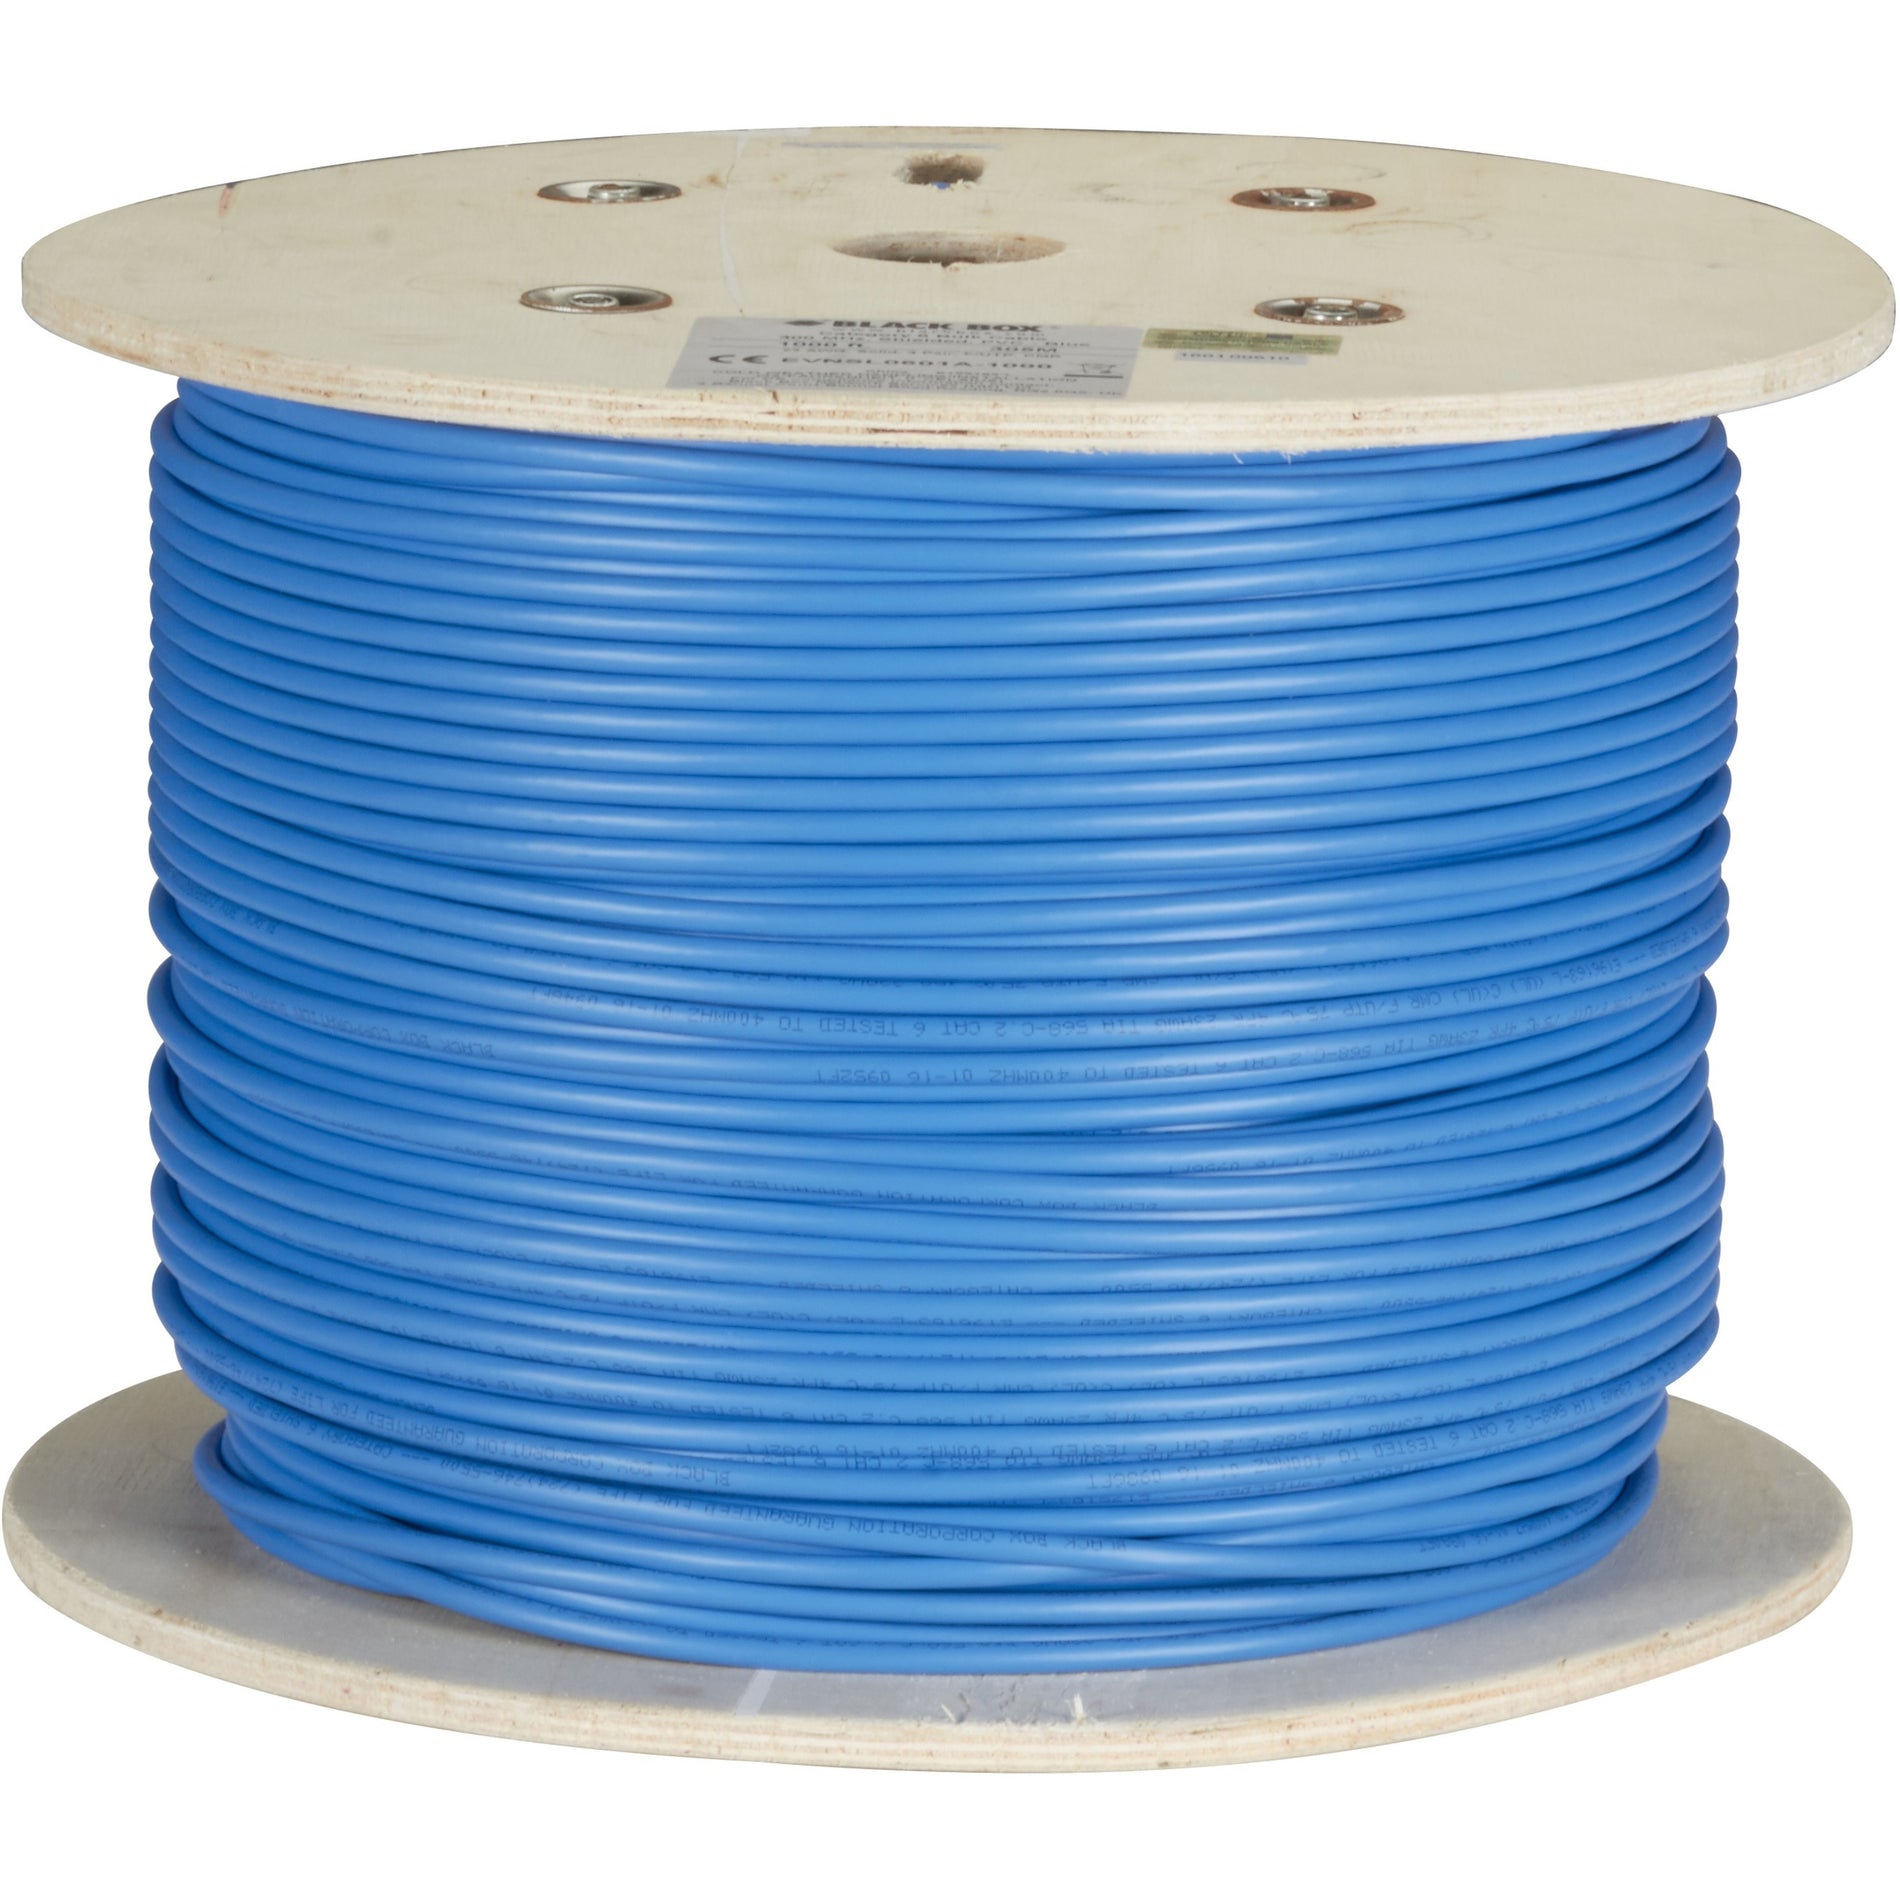 Black Box EVNSL0601A-1000 CAT6 STP Cable - 1000ft, Blue. High-Speed Network Cable with Lifetime Warranty.